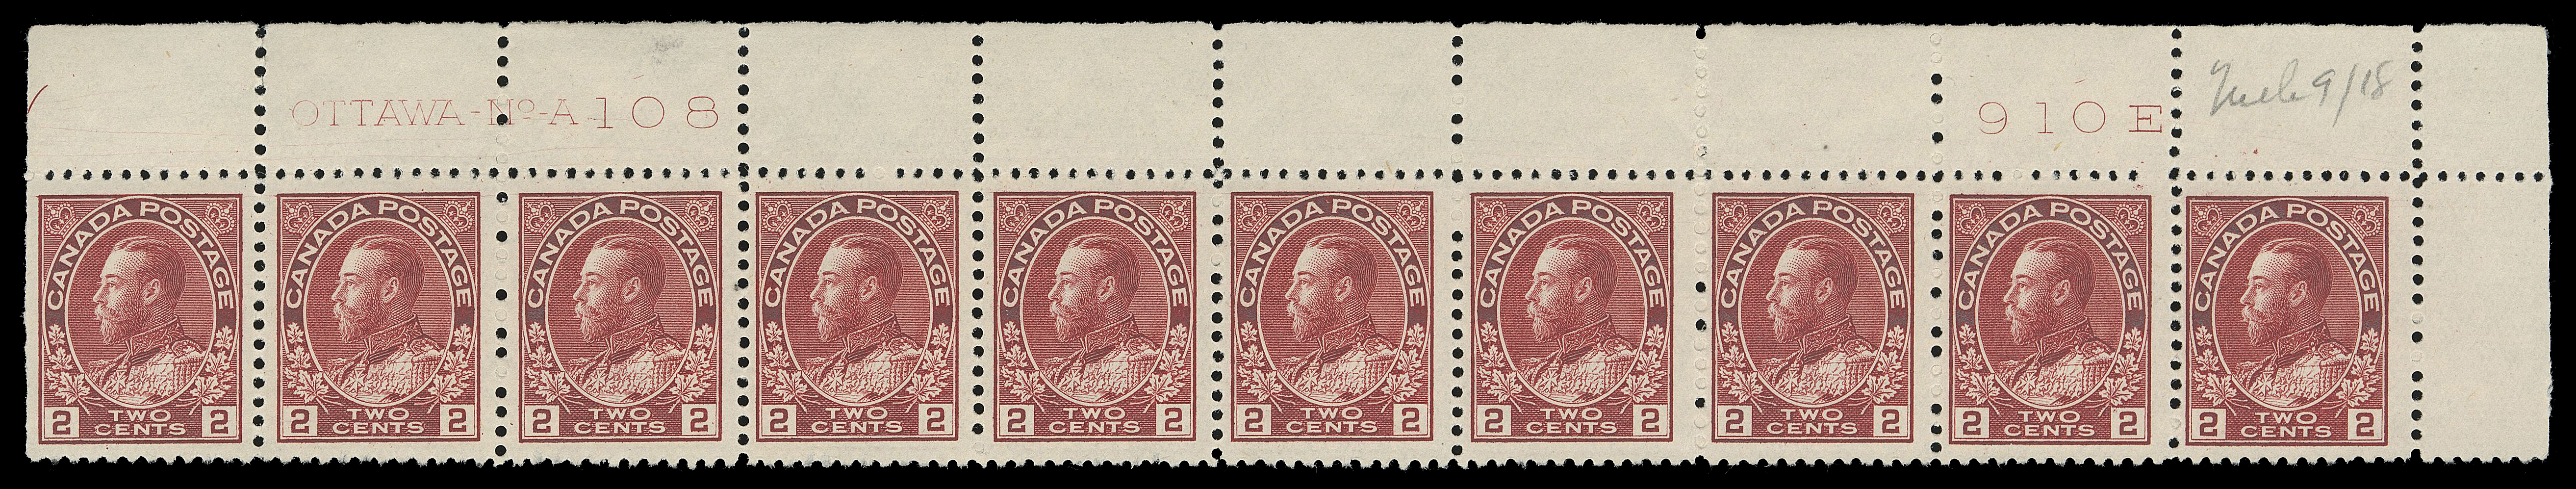 ADMIRAL STAMPS  106,A quartet of plate strips of ten with consecutive numbers – UR Plate 108, UL Plate 109, UR Plate 110 and UR Plate 111. Quite well centered with rich colour, last strip has natural gum crease on right pair, each with pencil date of acquisition, VF. (Unitrade cat. $4,800)